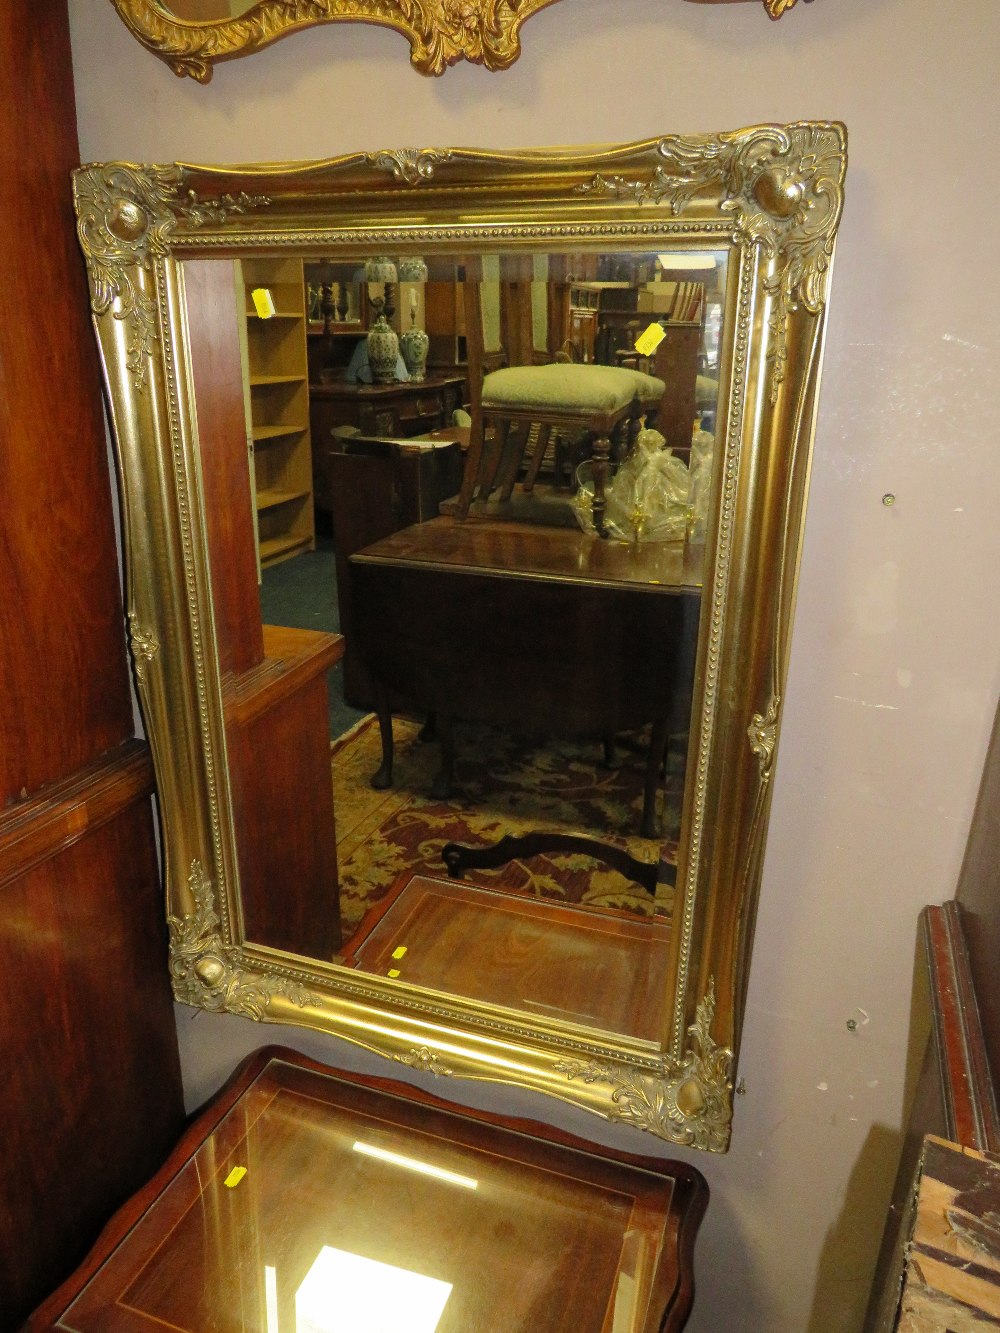 TWO 20TH C GILT WALL MIRRORS - Image 3 of 3